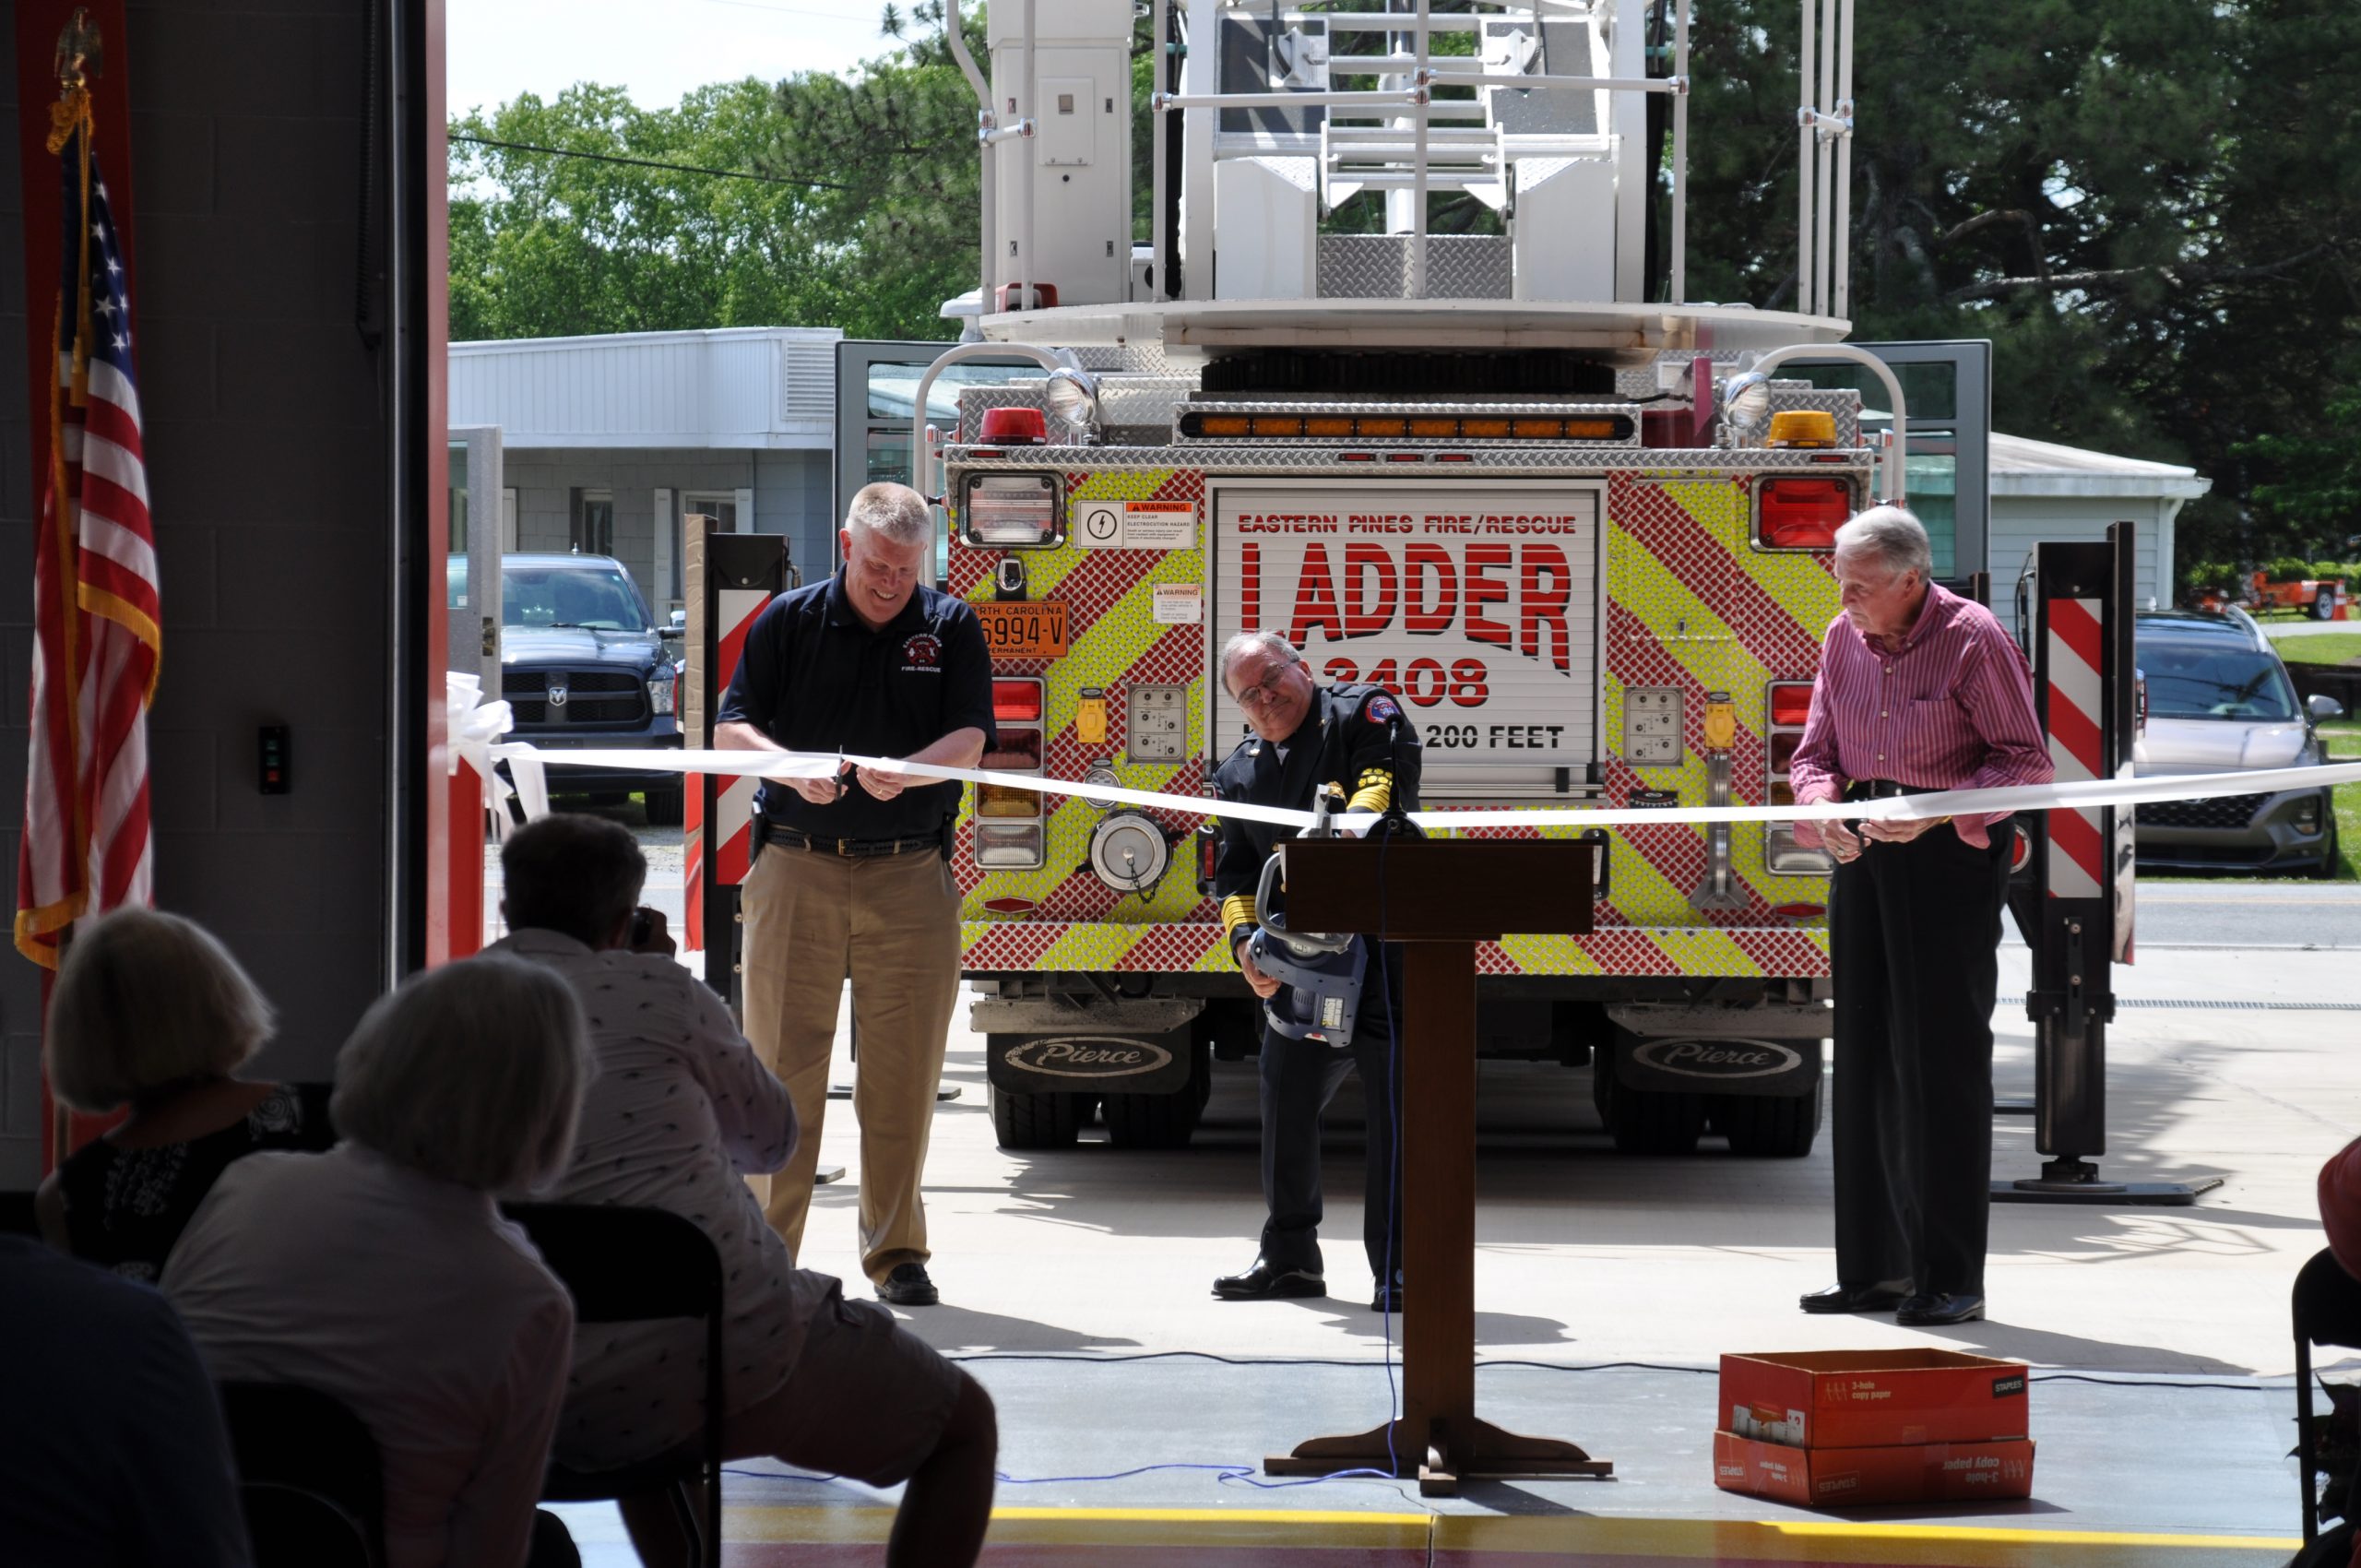 Eastern Pines Fire/Rescue ribbon cutting